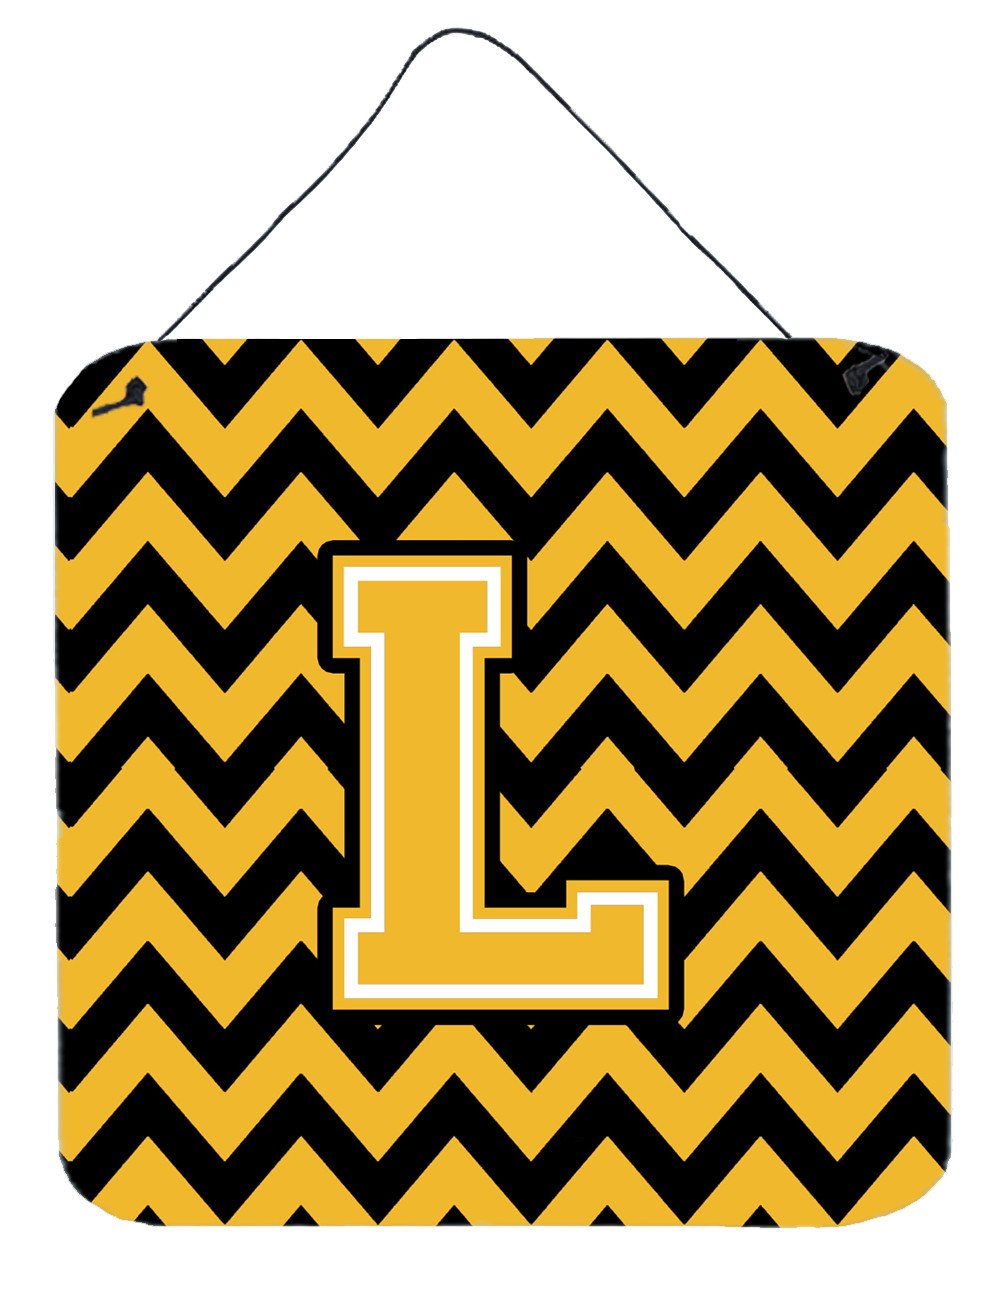 Letter L Chevron Black and Gold Wall or Door Hanging Prints CJ1053-LDS66 by Caroline's Treasures